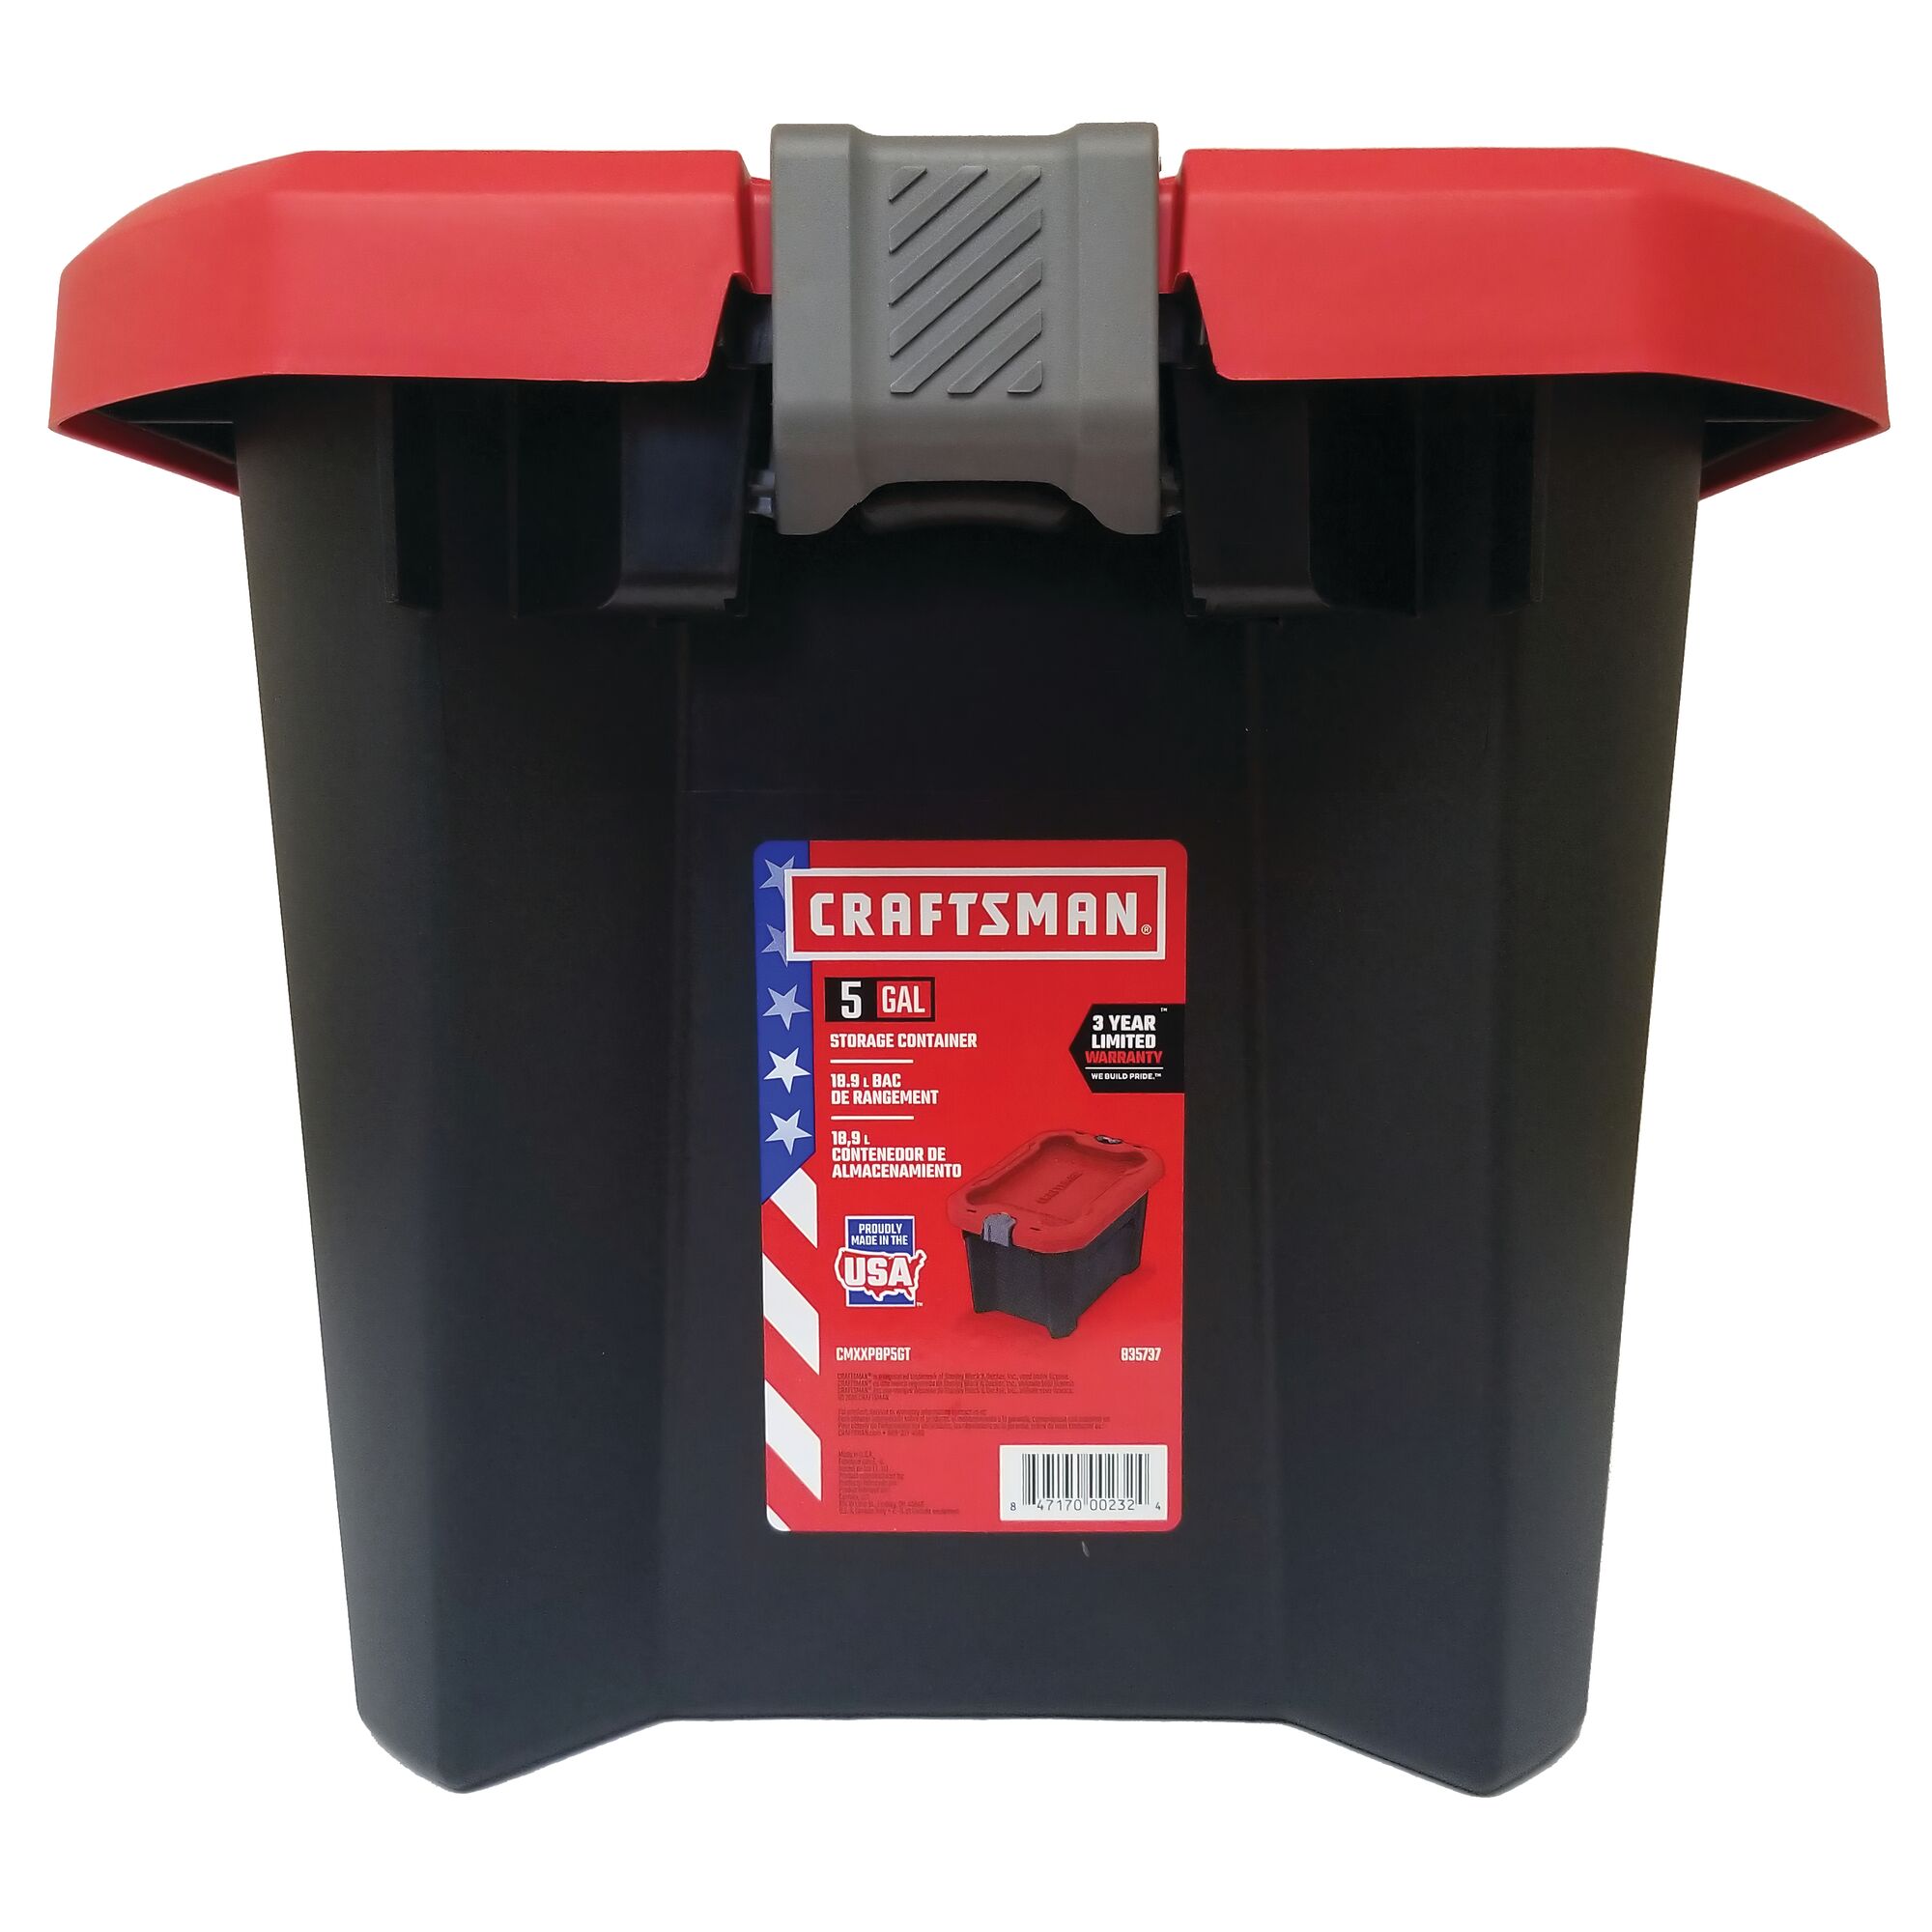 5 Gallon latching tote in packaging.